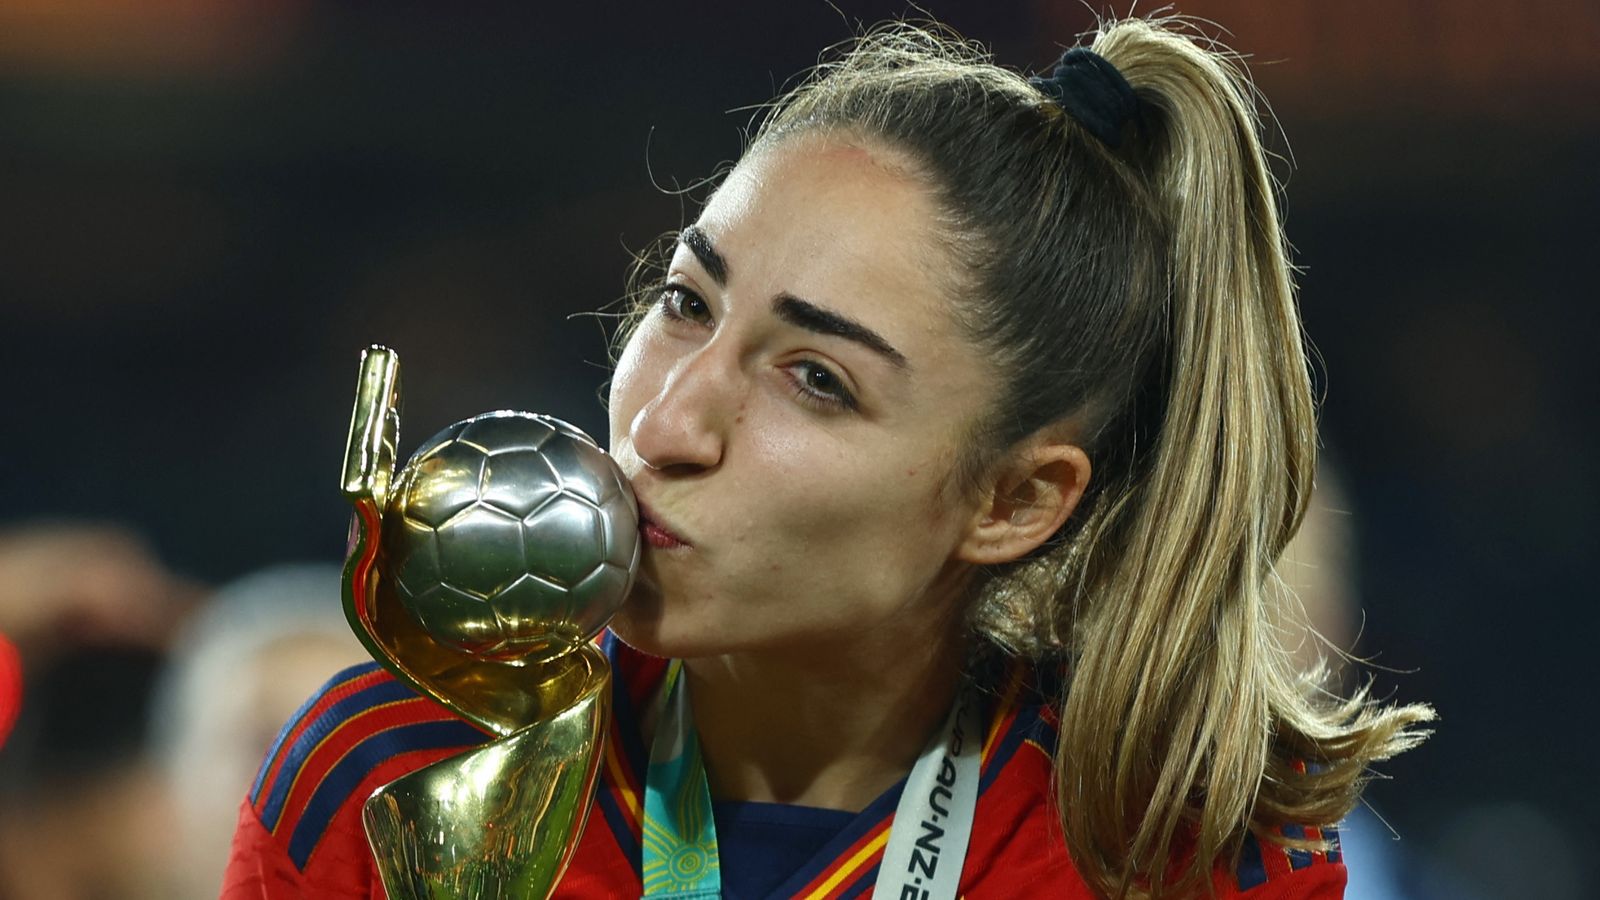 Women's World Cup: Spain's Olga Carmona learns of father's death after game